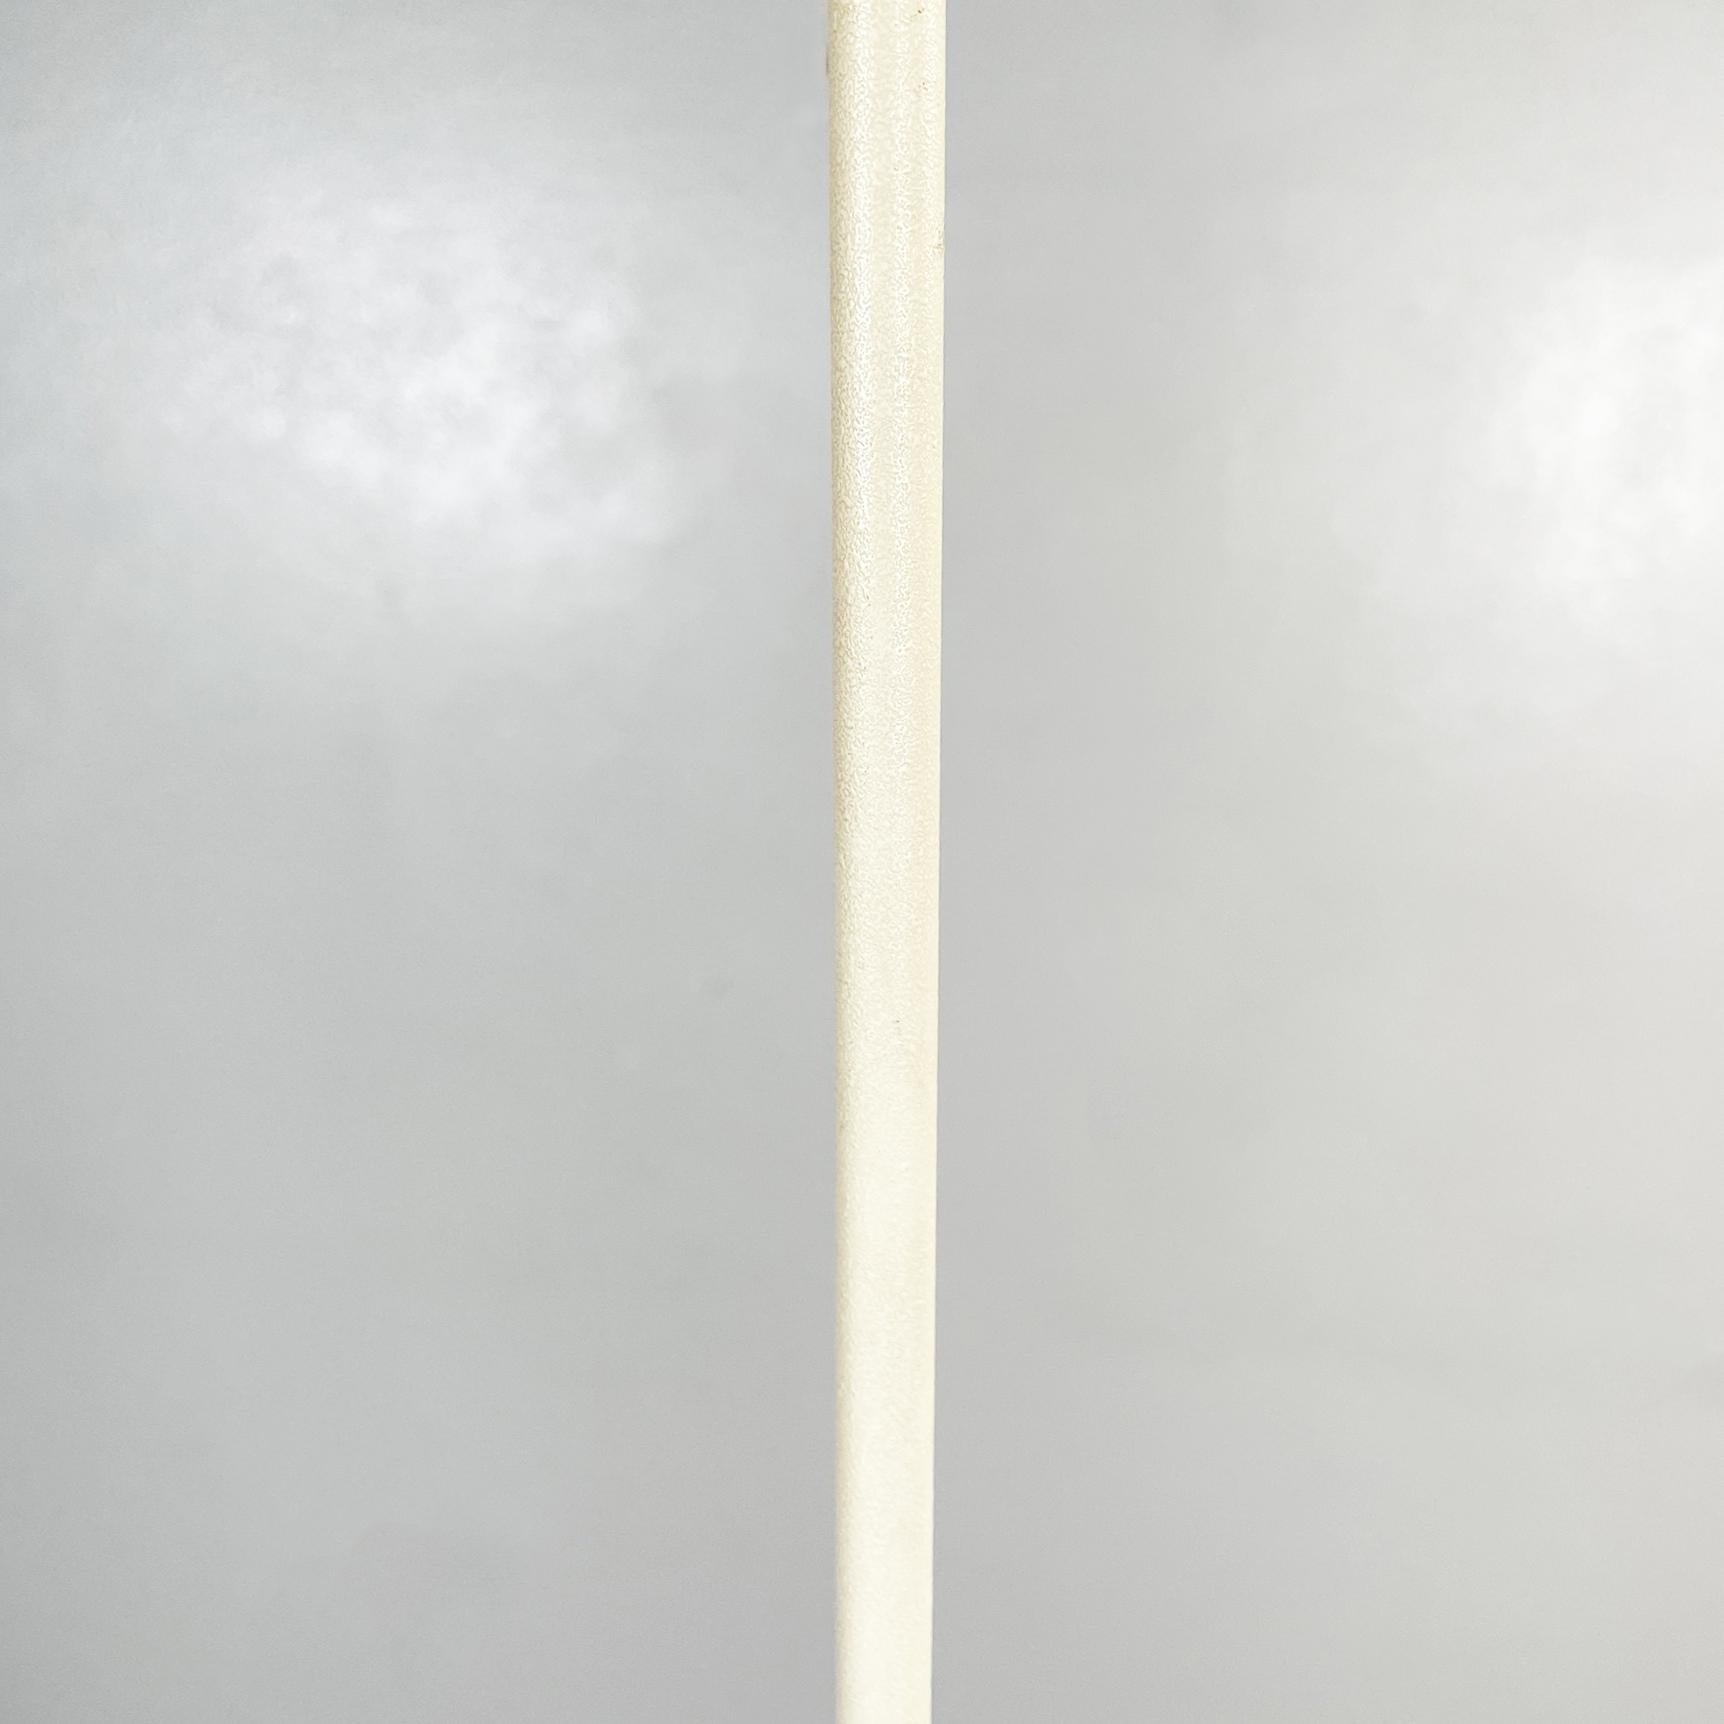 Italian Mid-Century Modern Floor Lamp in White Fabric and Metal, 1980s For Sale 4